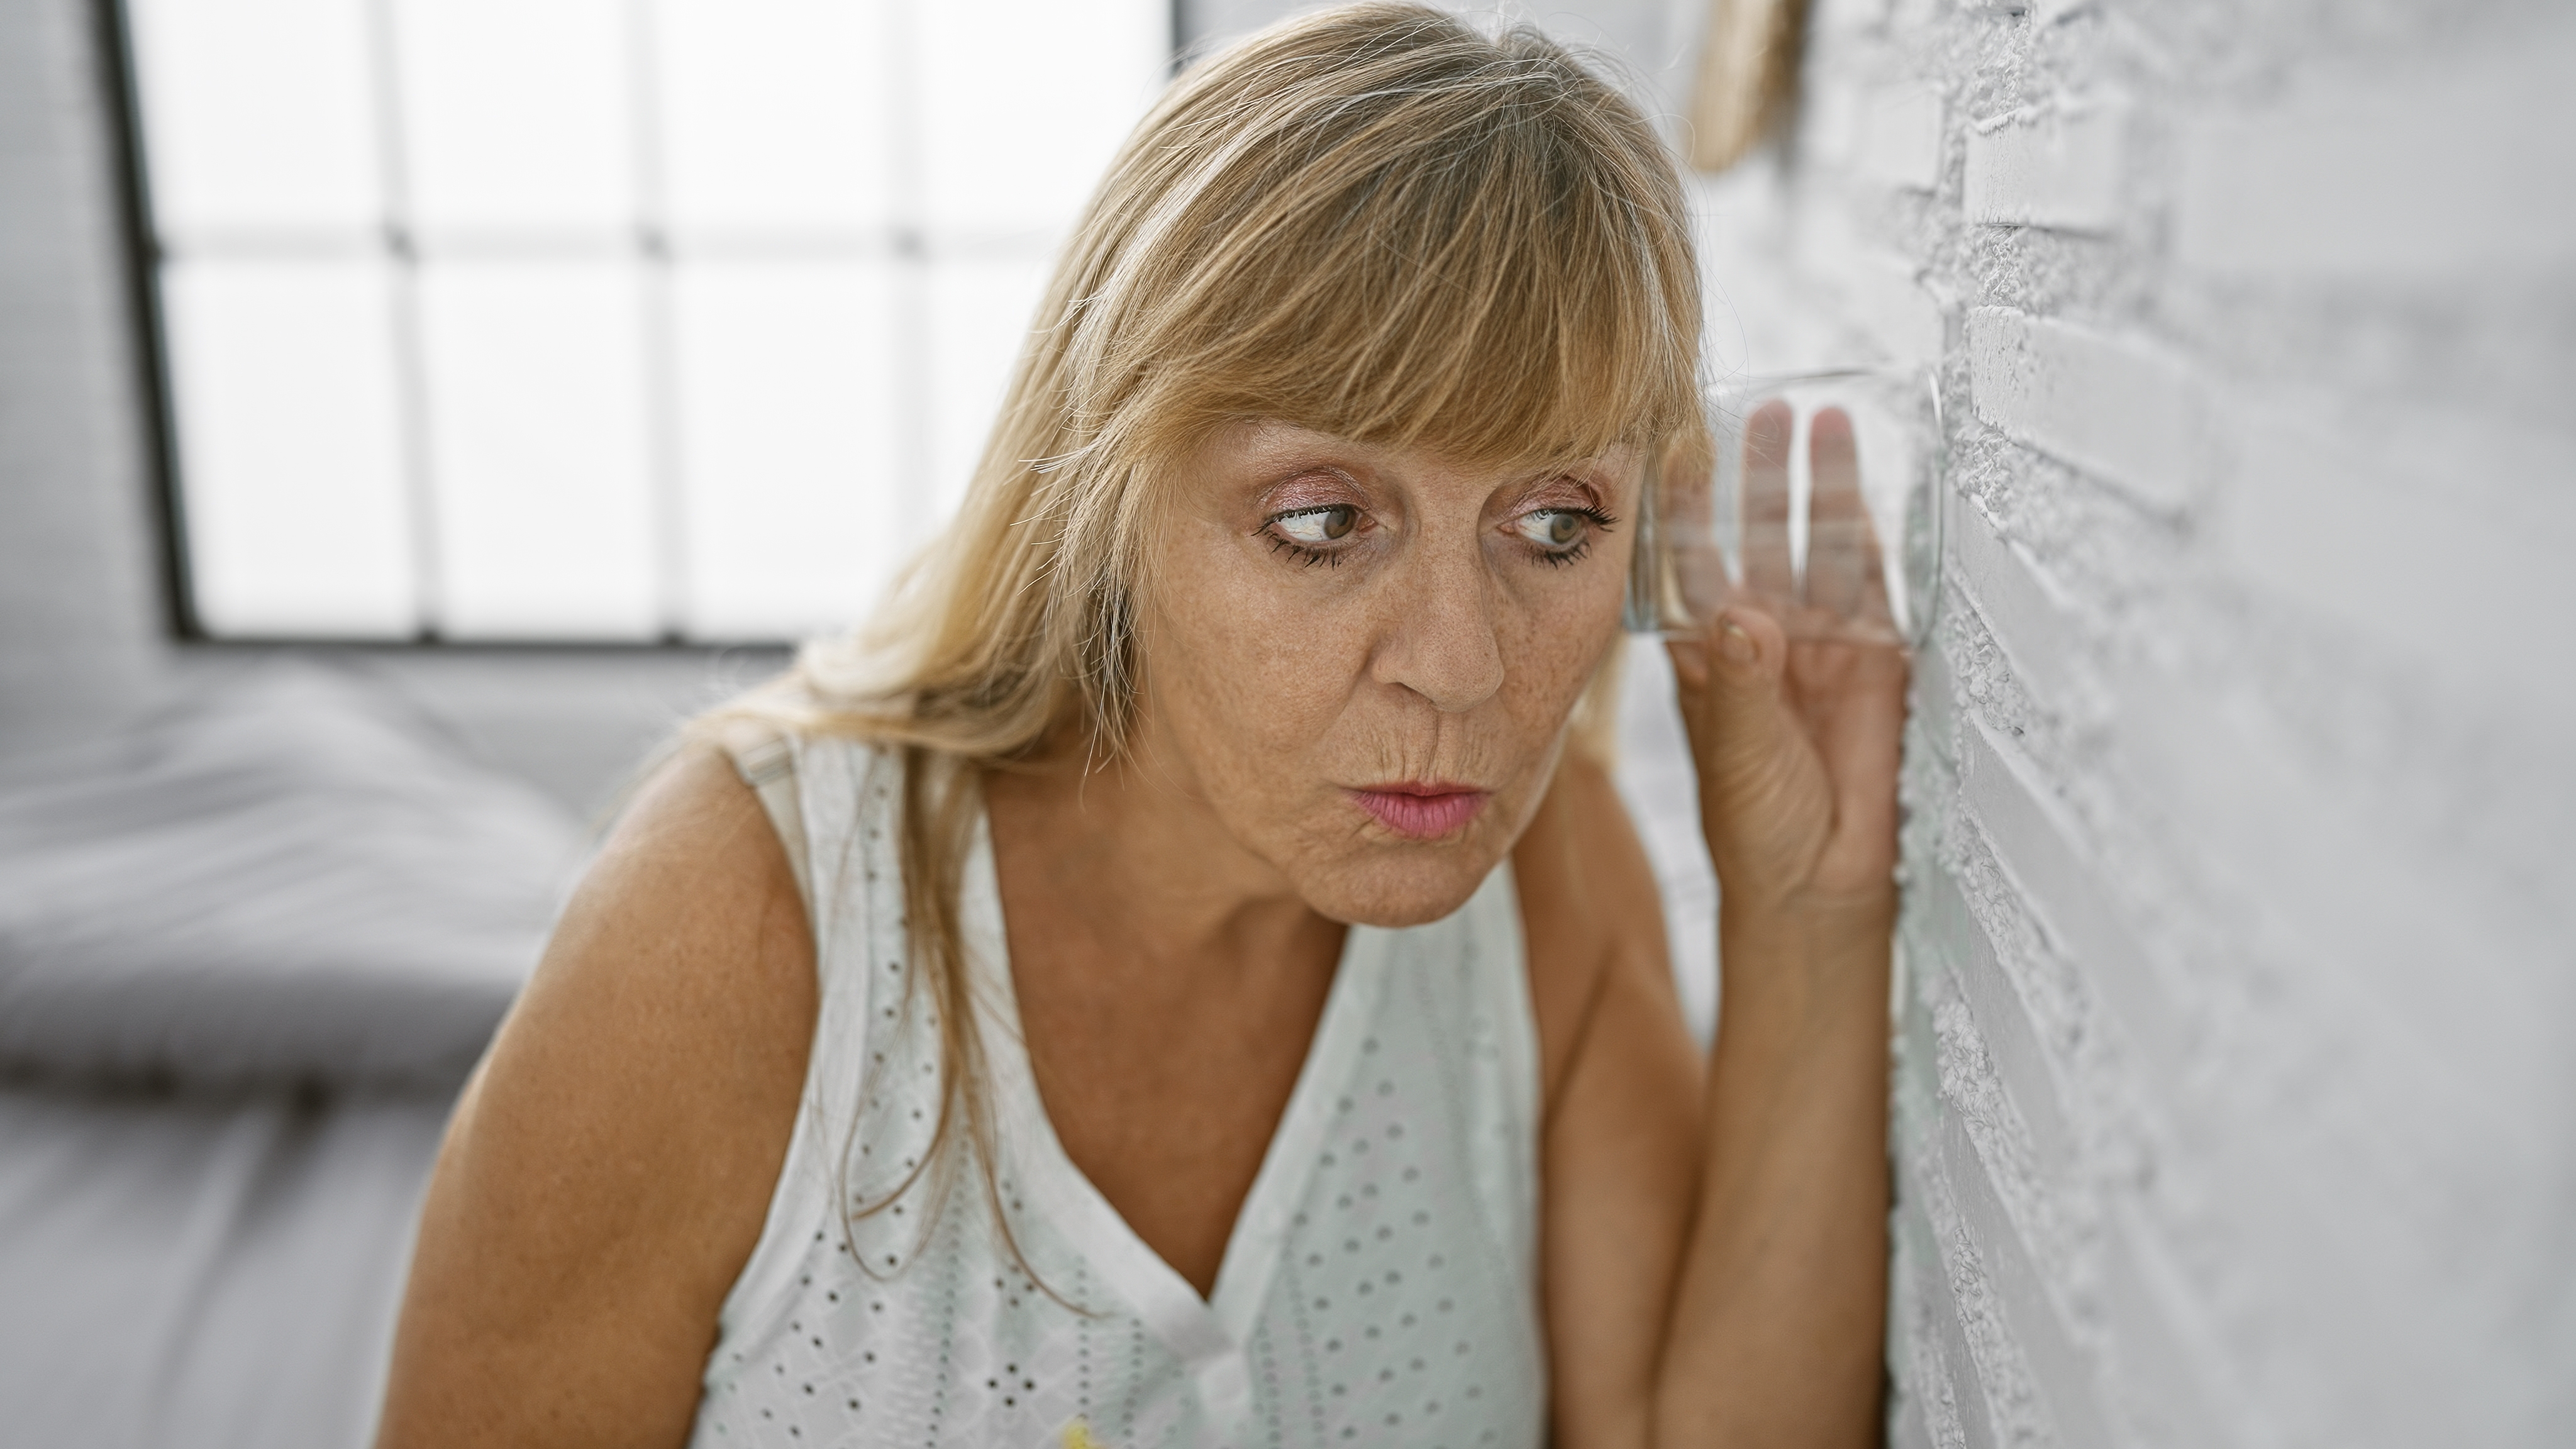 A middle-aged woman eavesdropping | Source: Shutterstock